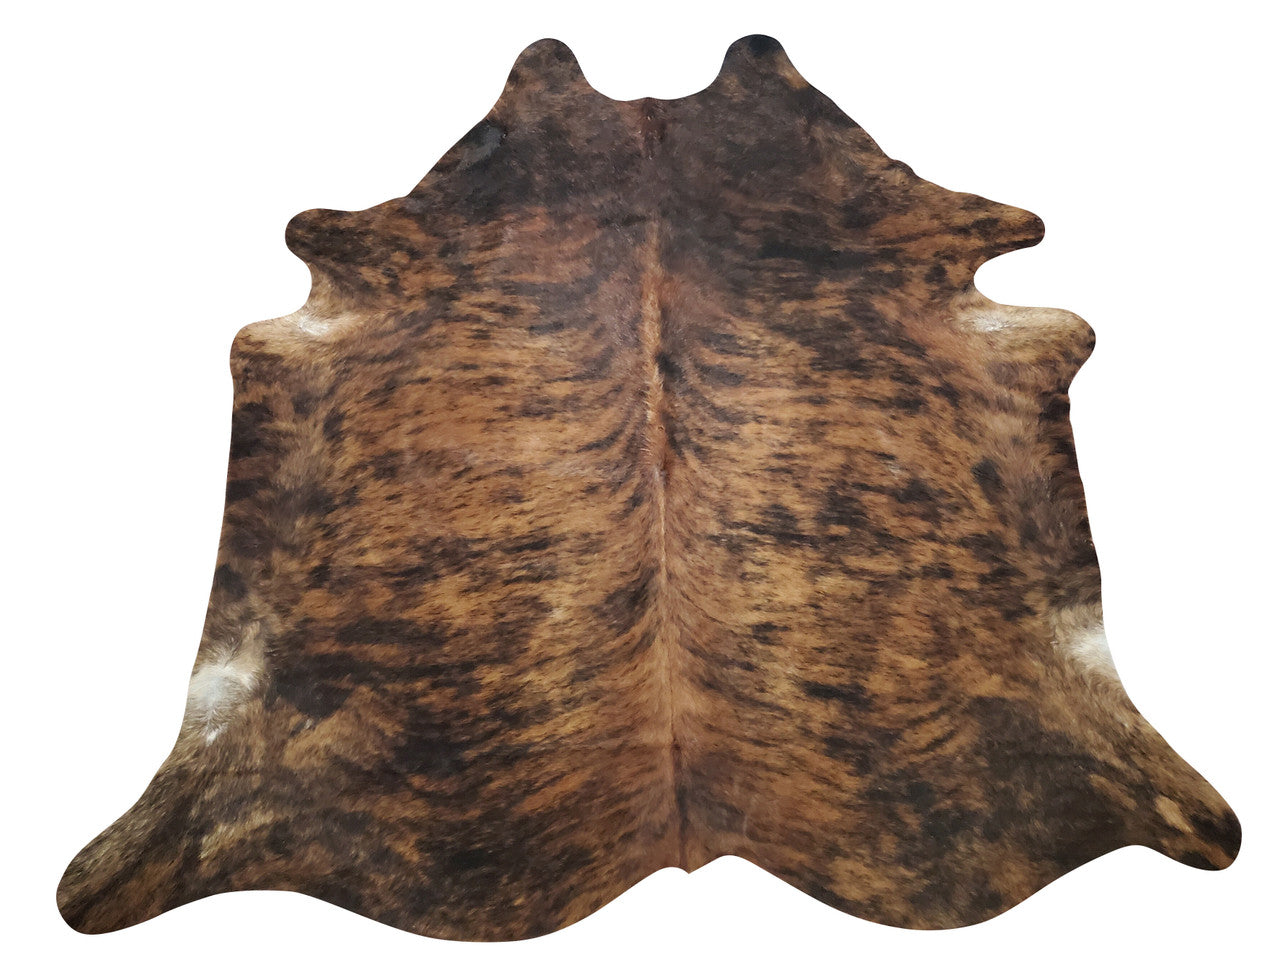 So soft and thick brown cowhide rug,  everyone loves walking on it. The colors are great.